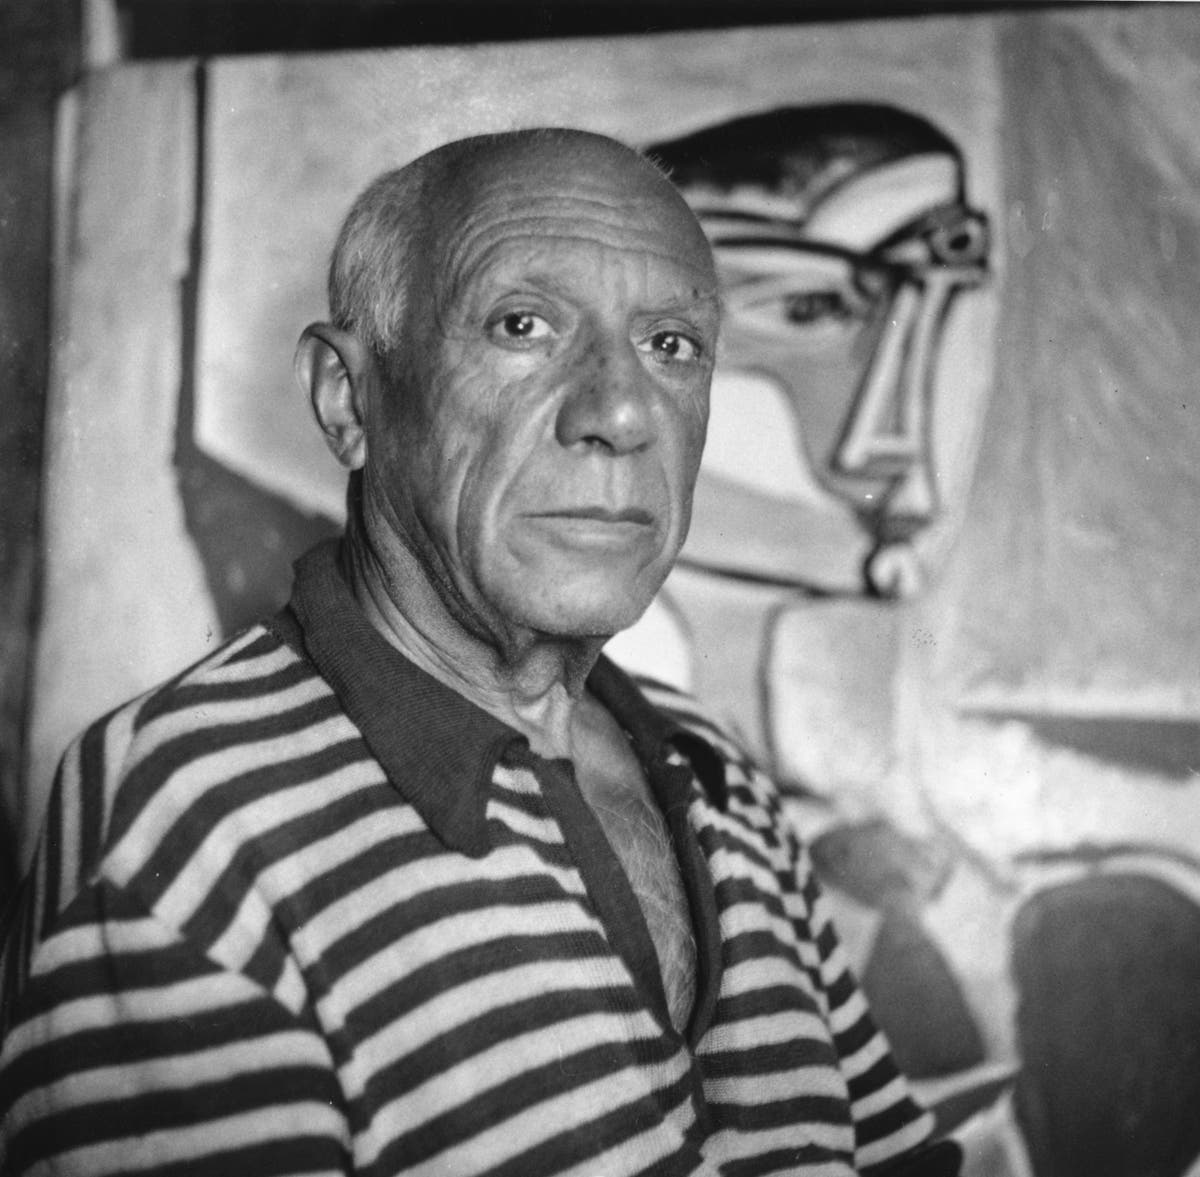 Pablo Picasso’s grandson says artist’s lovers ‘knew’ about his behaviour towards women